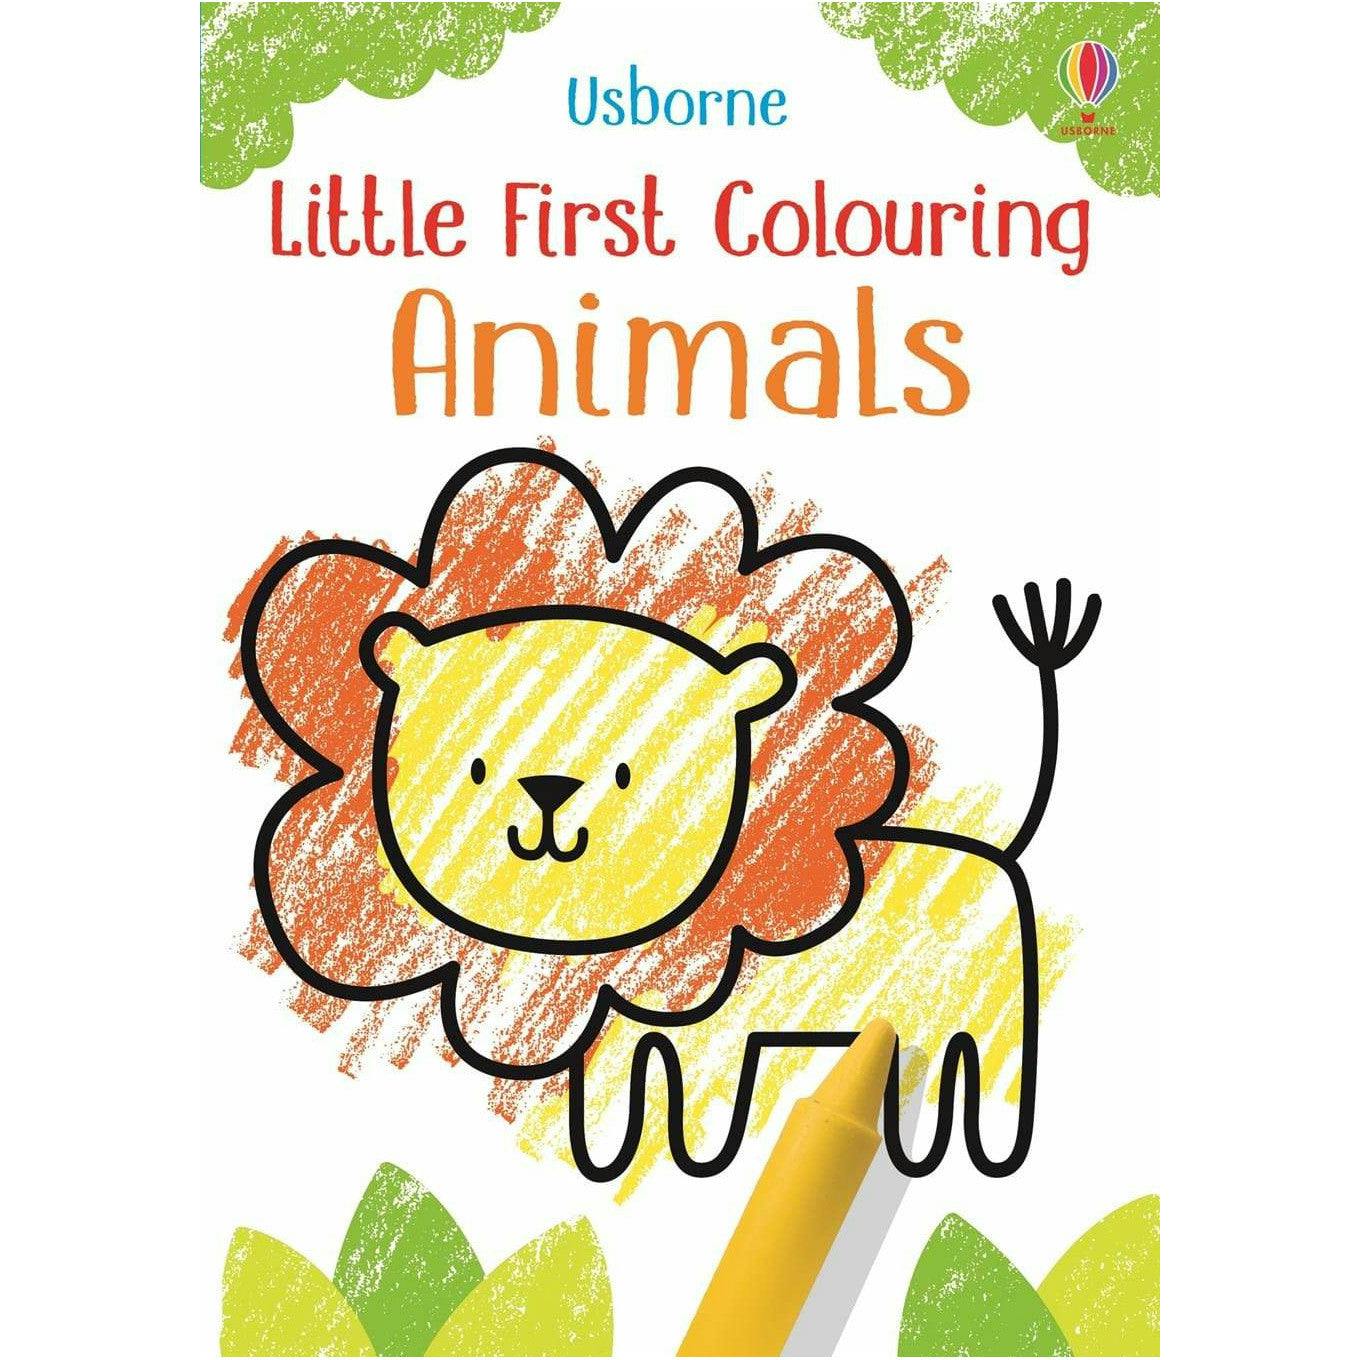 Usborne Little First Coloring Animals